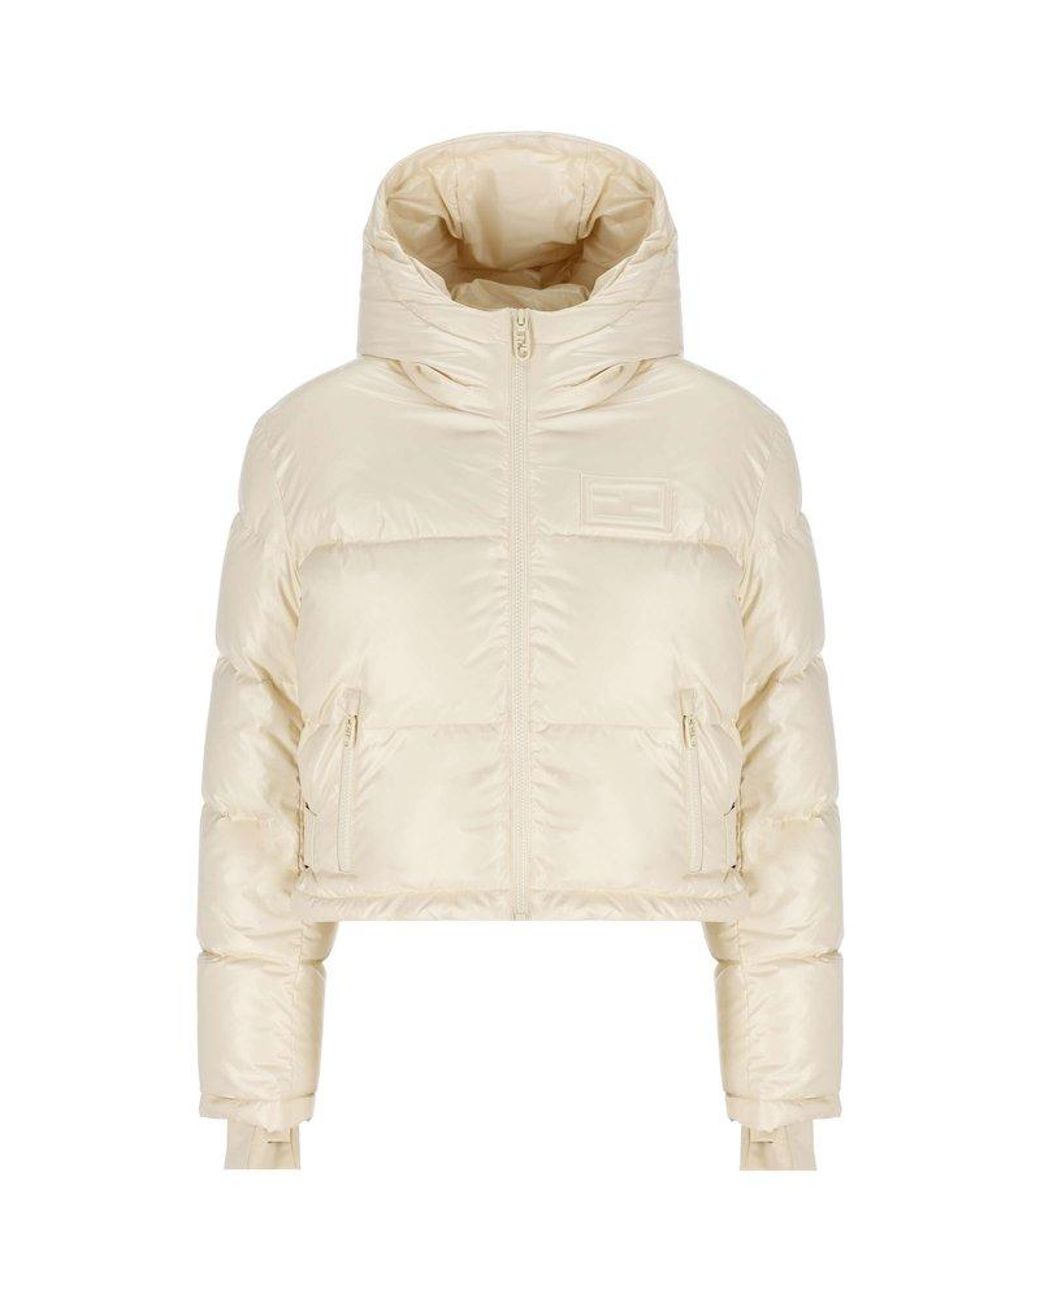 Fendi Cropped Zip-up Padded Jacket in White | Lyst